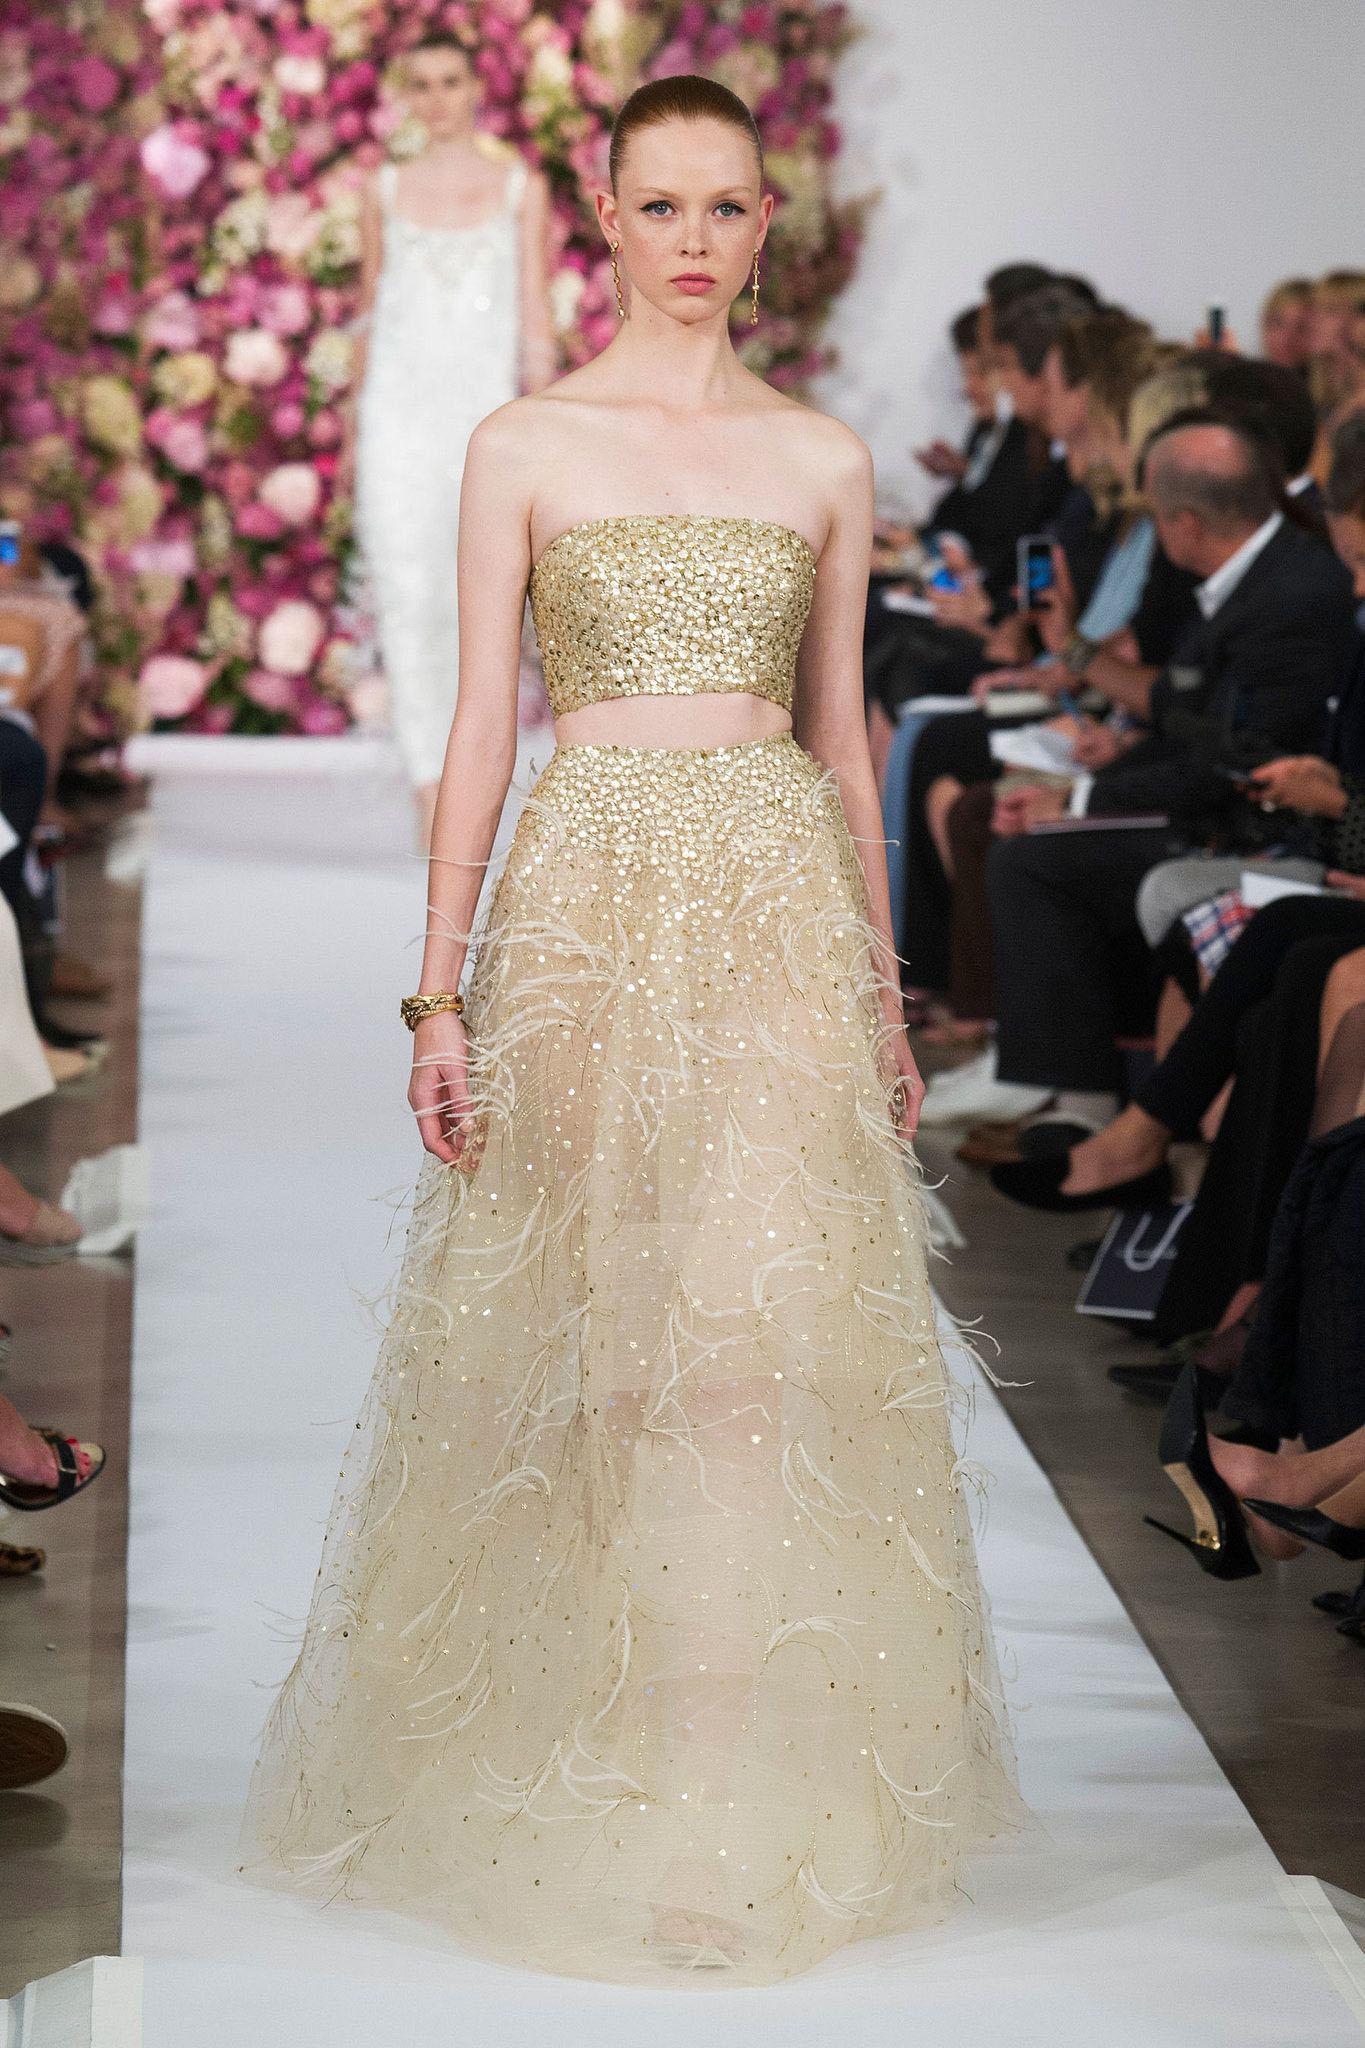 Oscar De La Renta Champagne Embellished Dress Gown
S/S 2015 Runway Collection
Designer size 10 - please check measurements.
Champagne Embellished Tulle Corset Gown Fished with Soft Gold Beads and Sequins, African Ostrich. Exclusive Embroidery. Lined